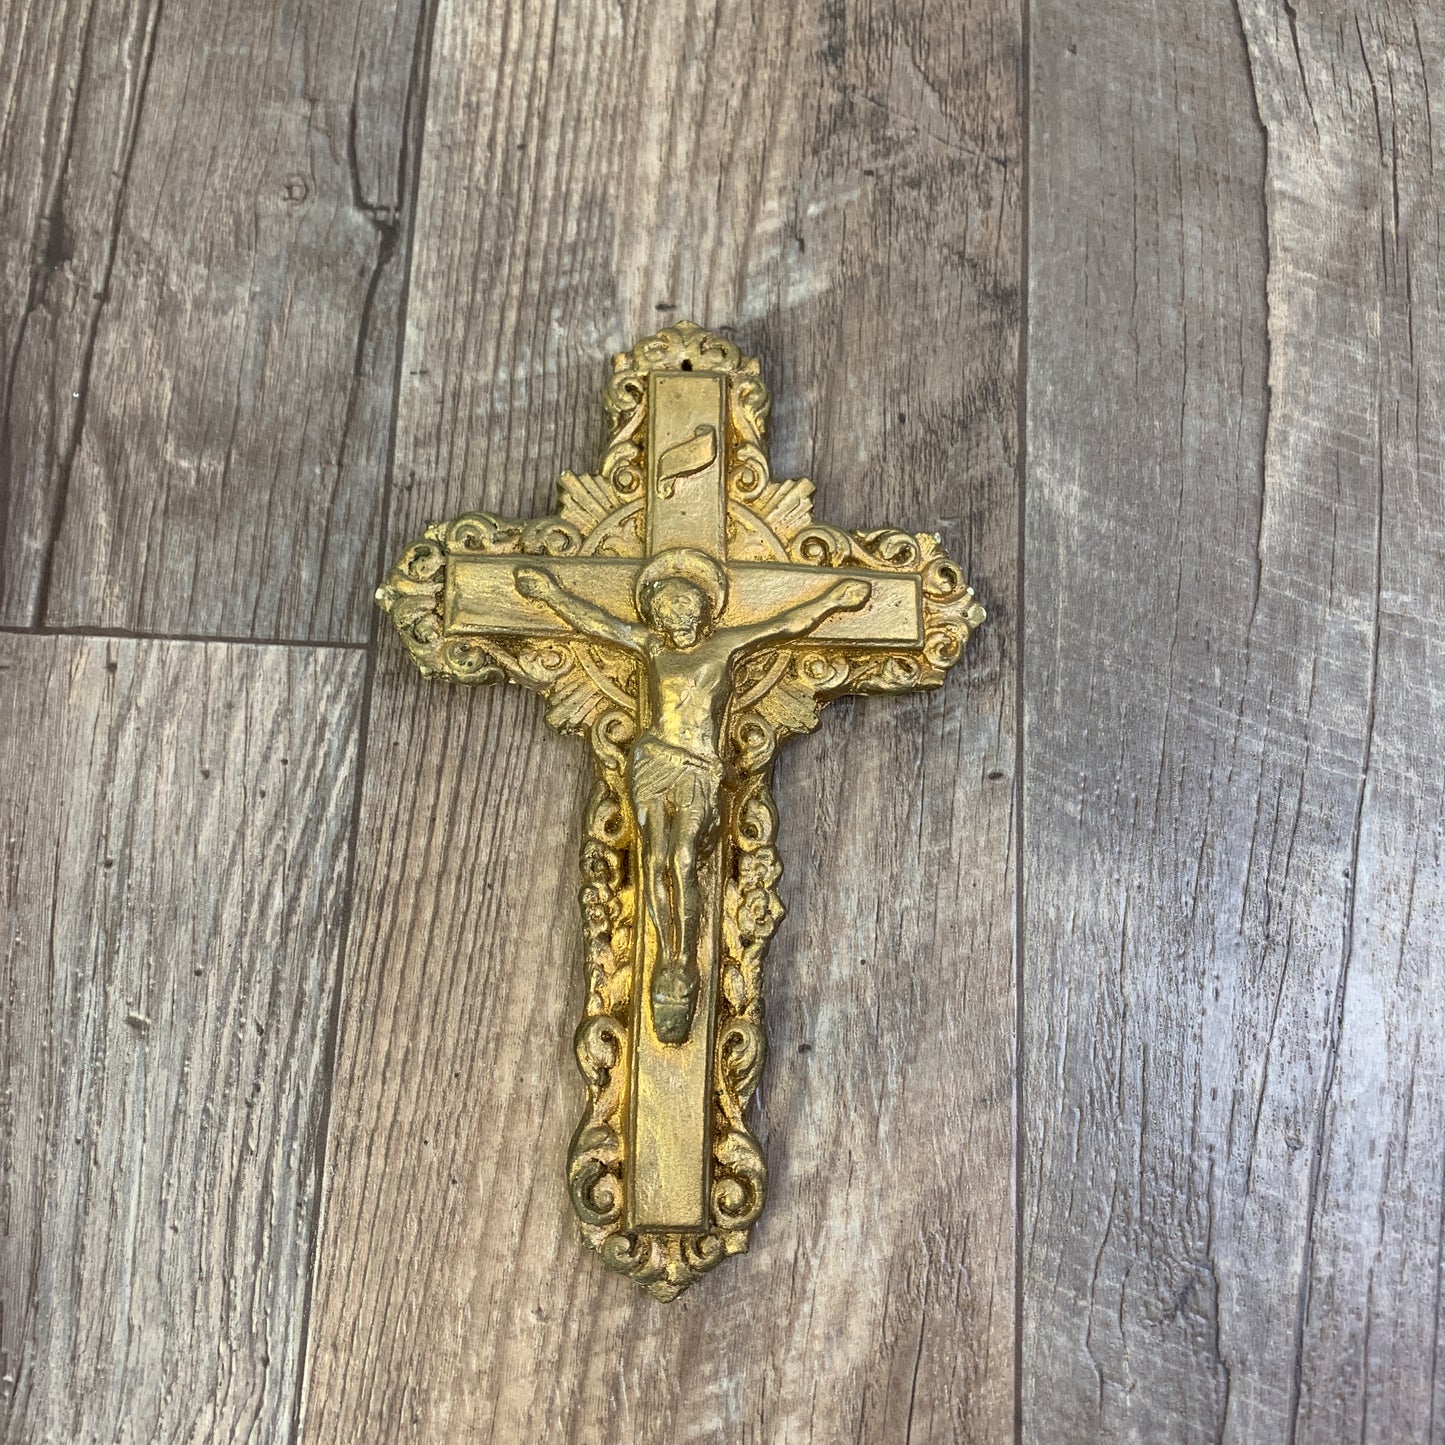 Vintage Chalkware Crucifix Religious Wall Hanging Gift for Christian